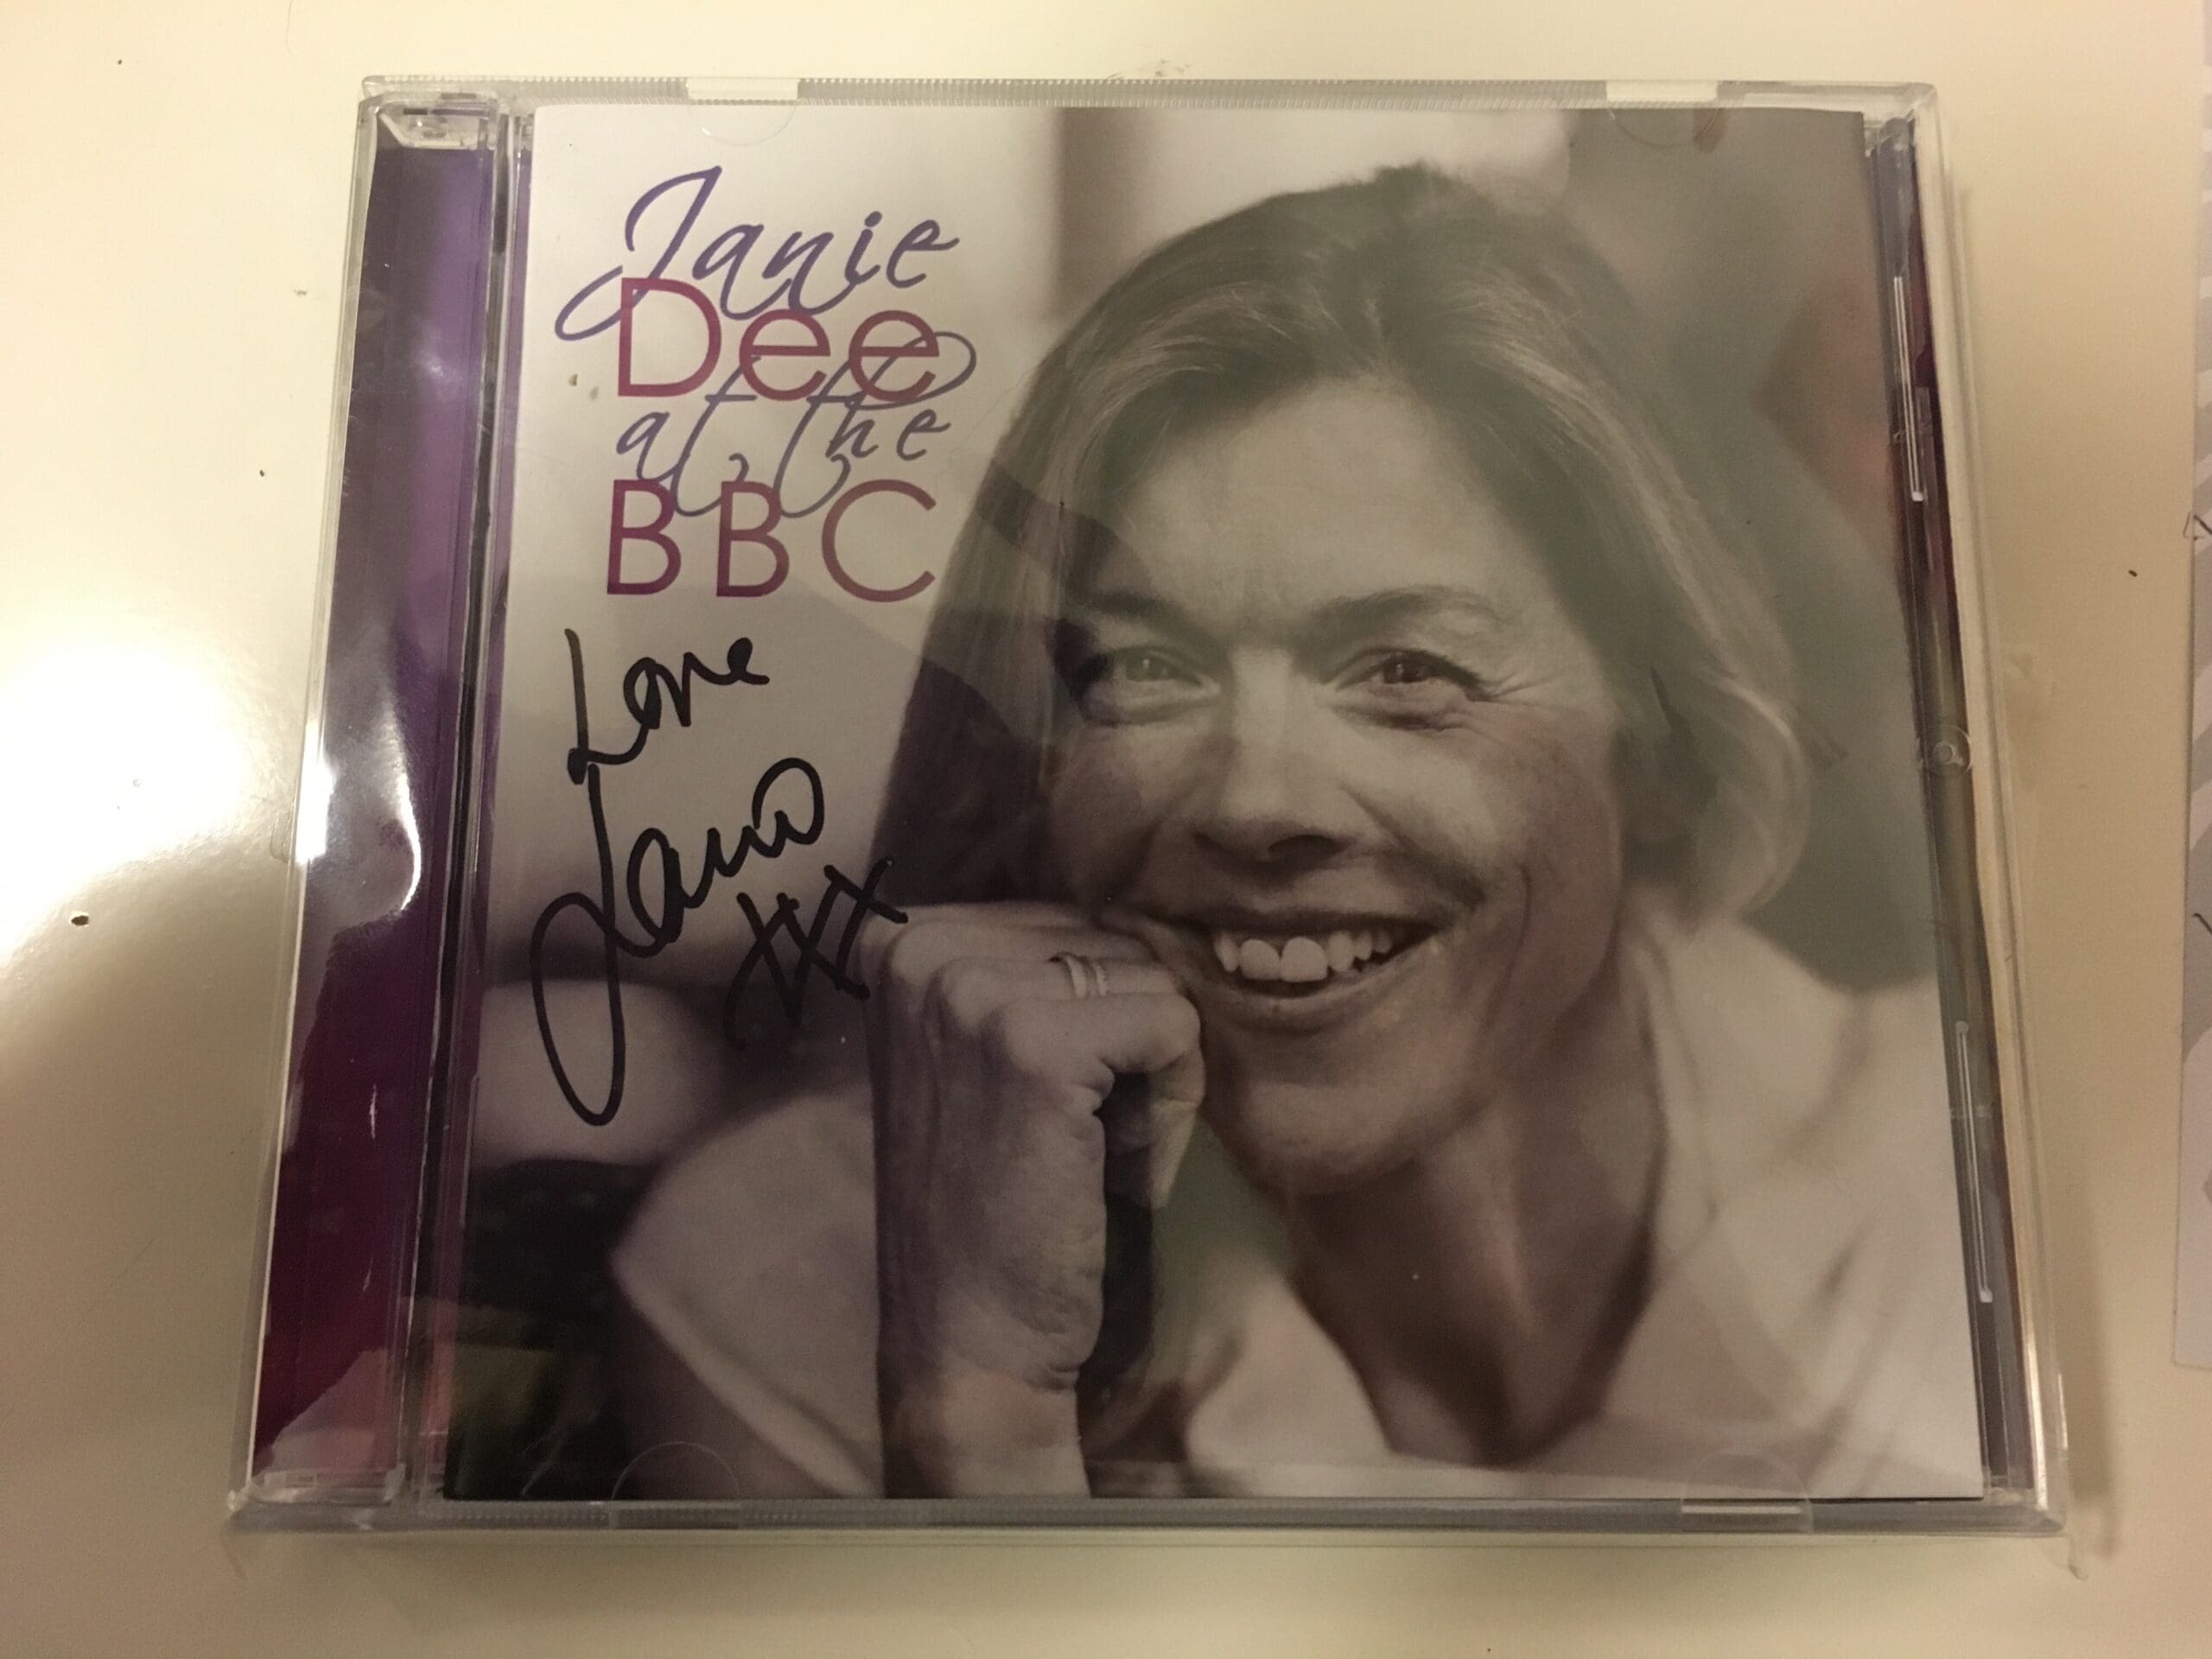 Featured image for “Enter our competition for a chance to win a CD signed by Janie Dee”